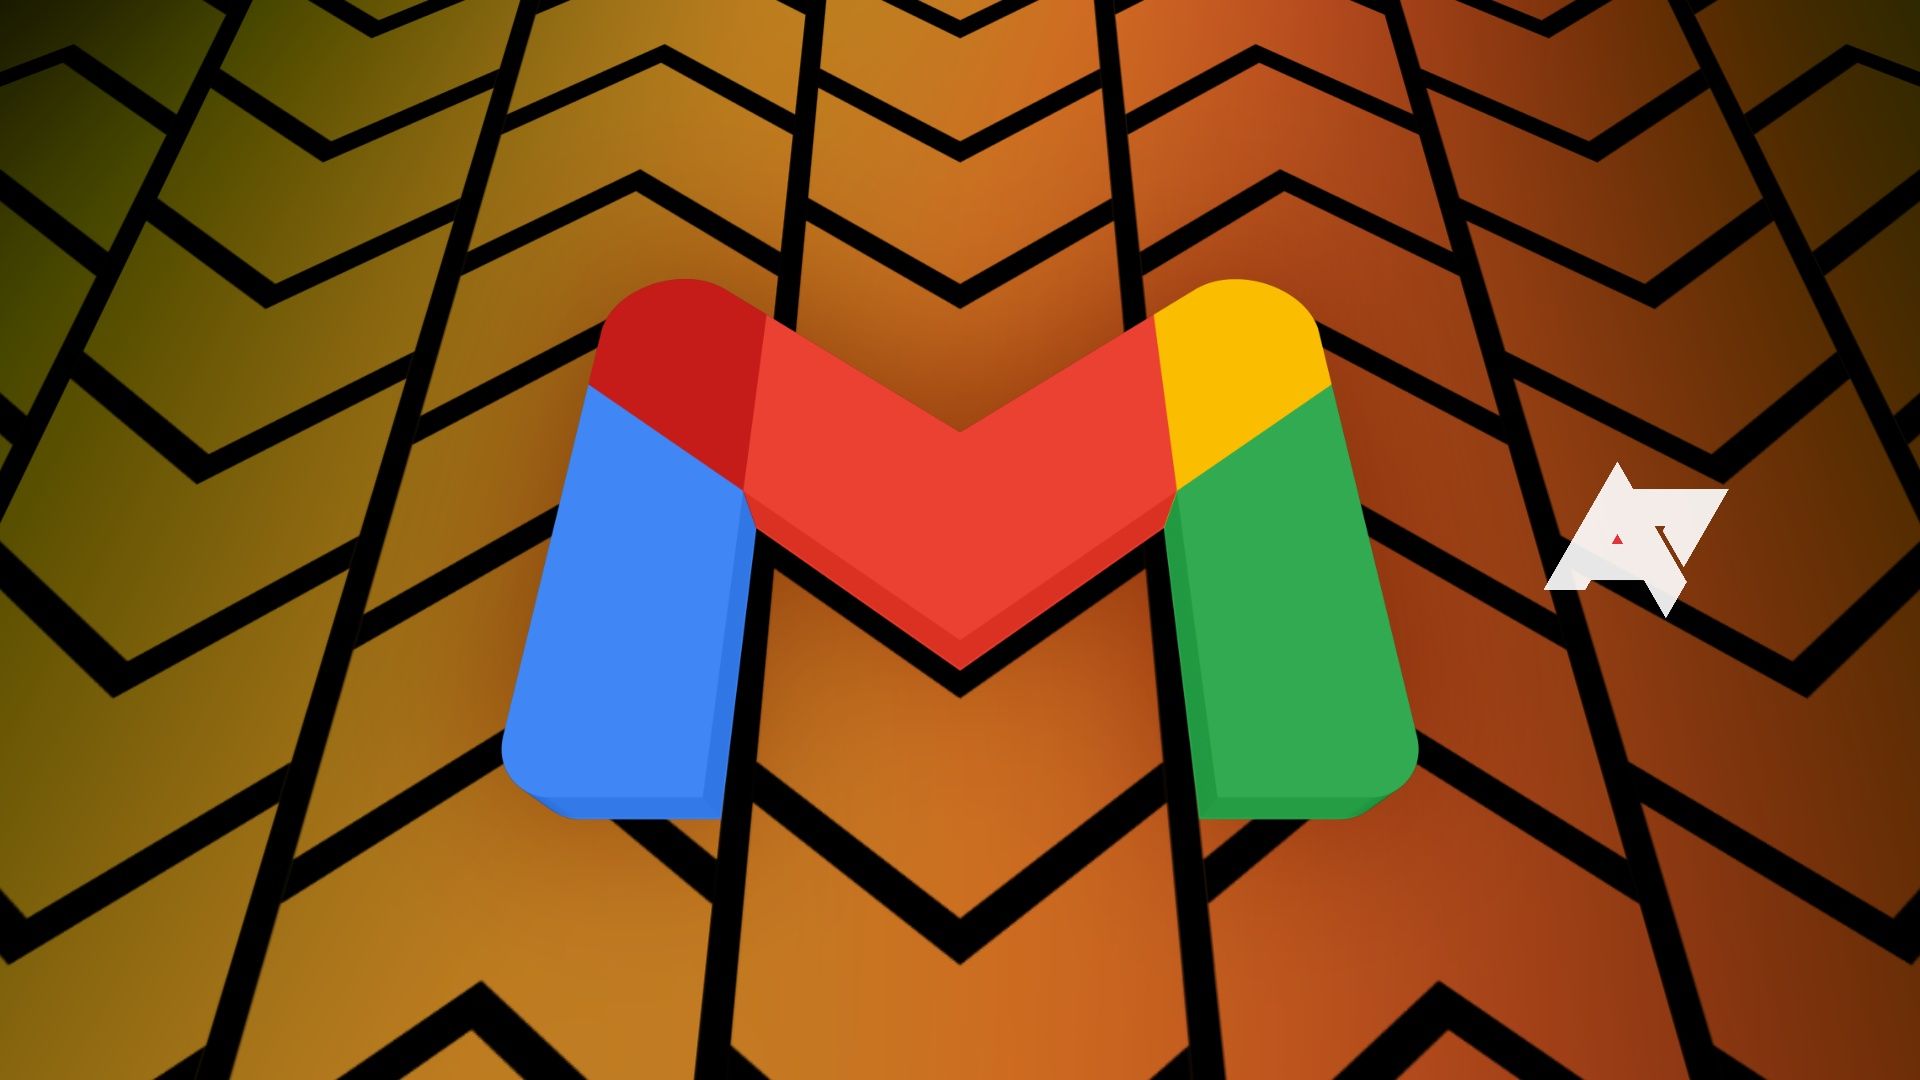 After all these years, Gmail for Android is finally getting the feature it needed from day one